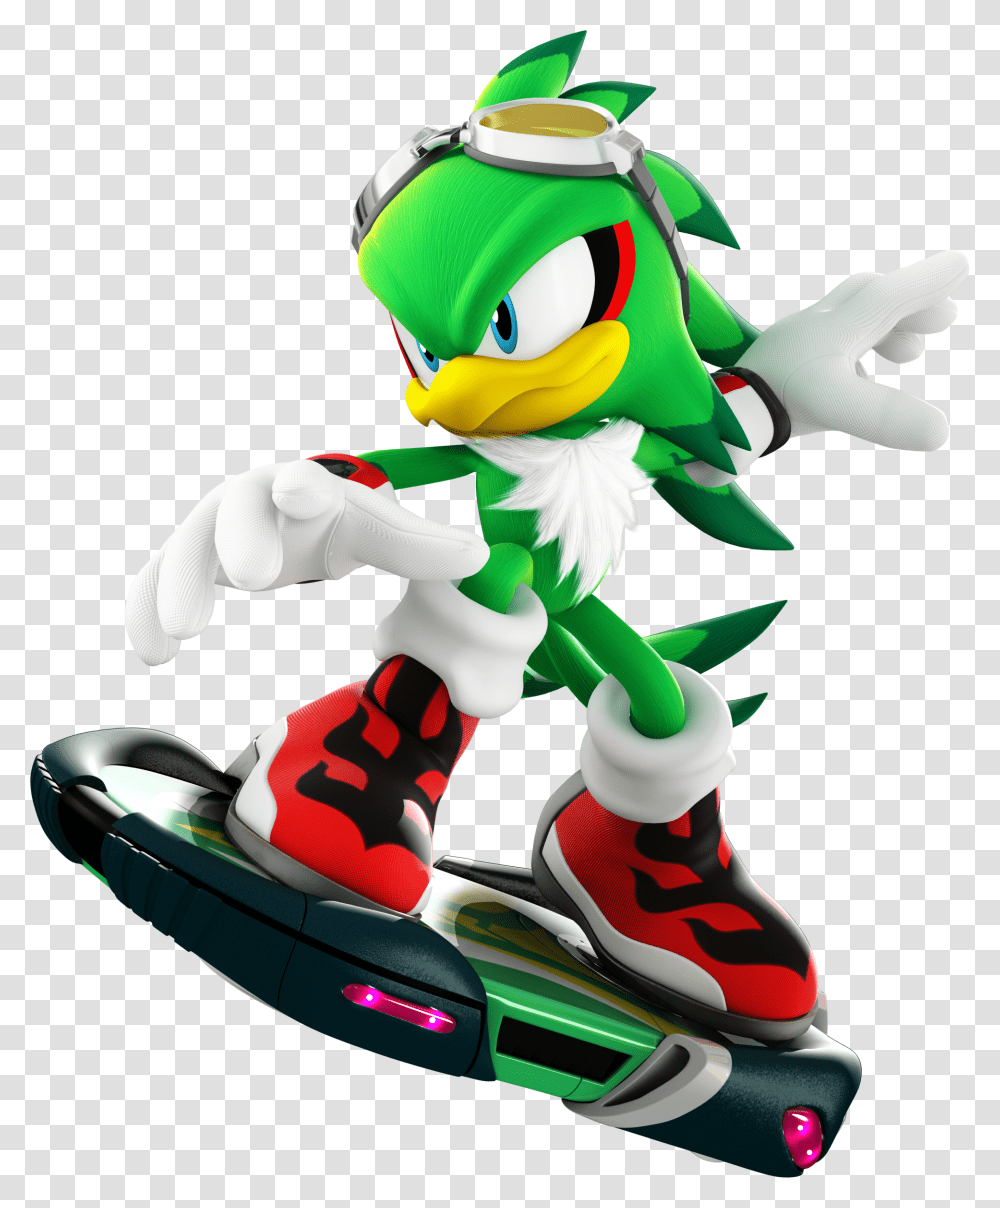 Sonic Free Riders Jet The Hawk, Toy, Mascot Transparent Png